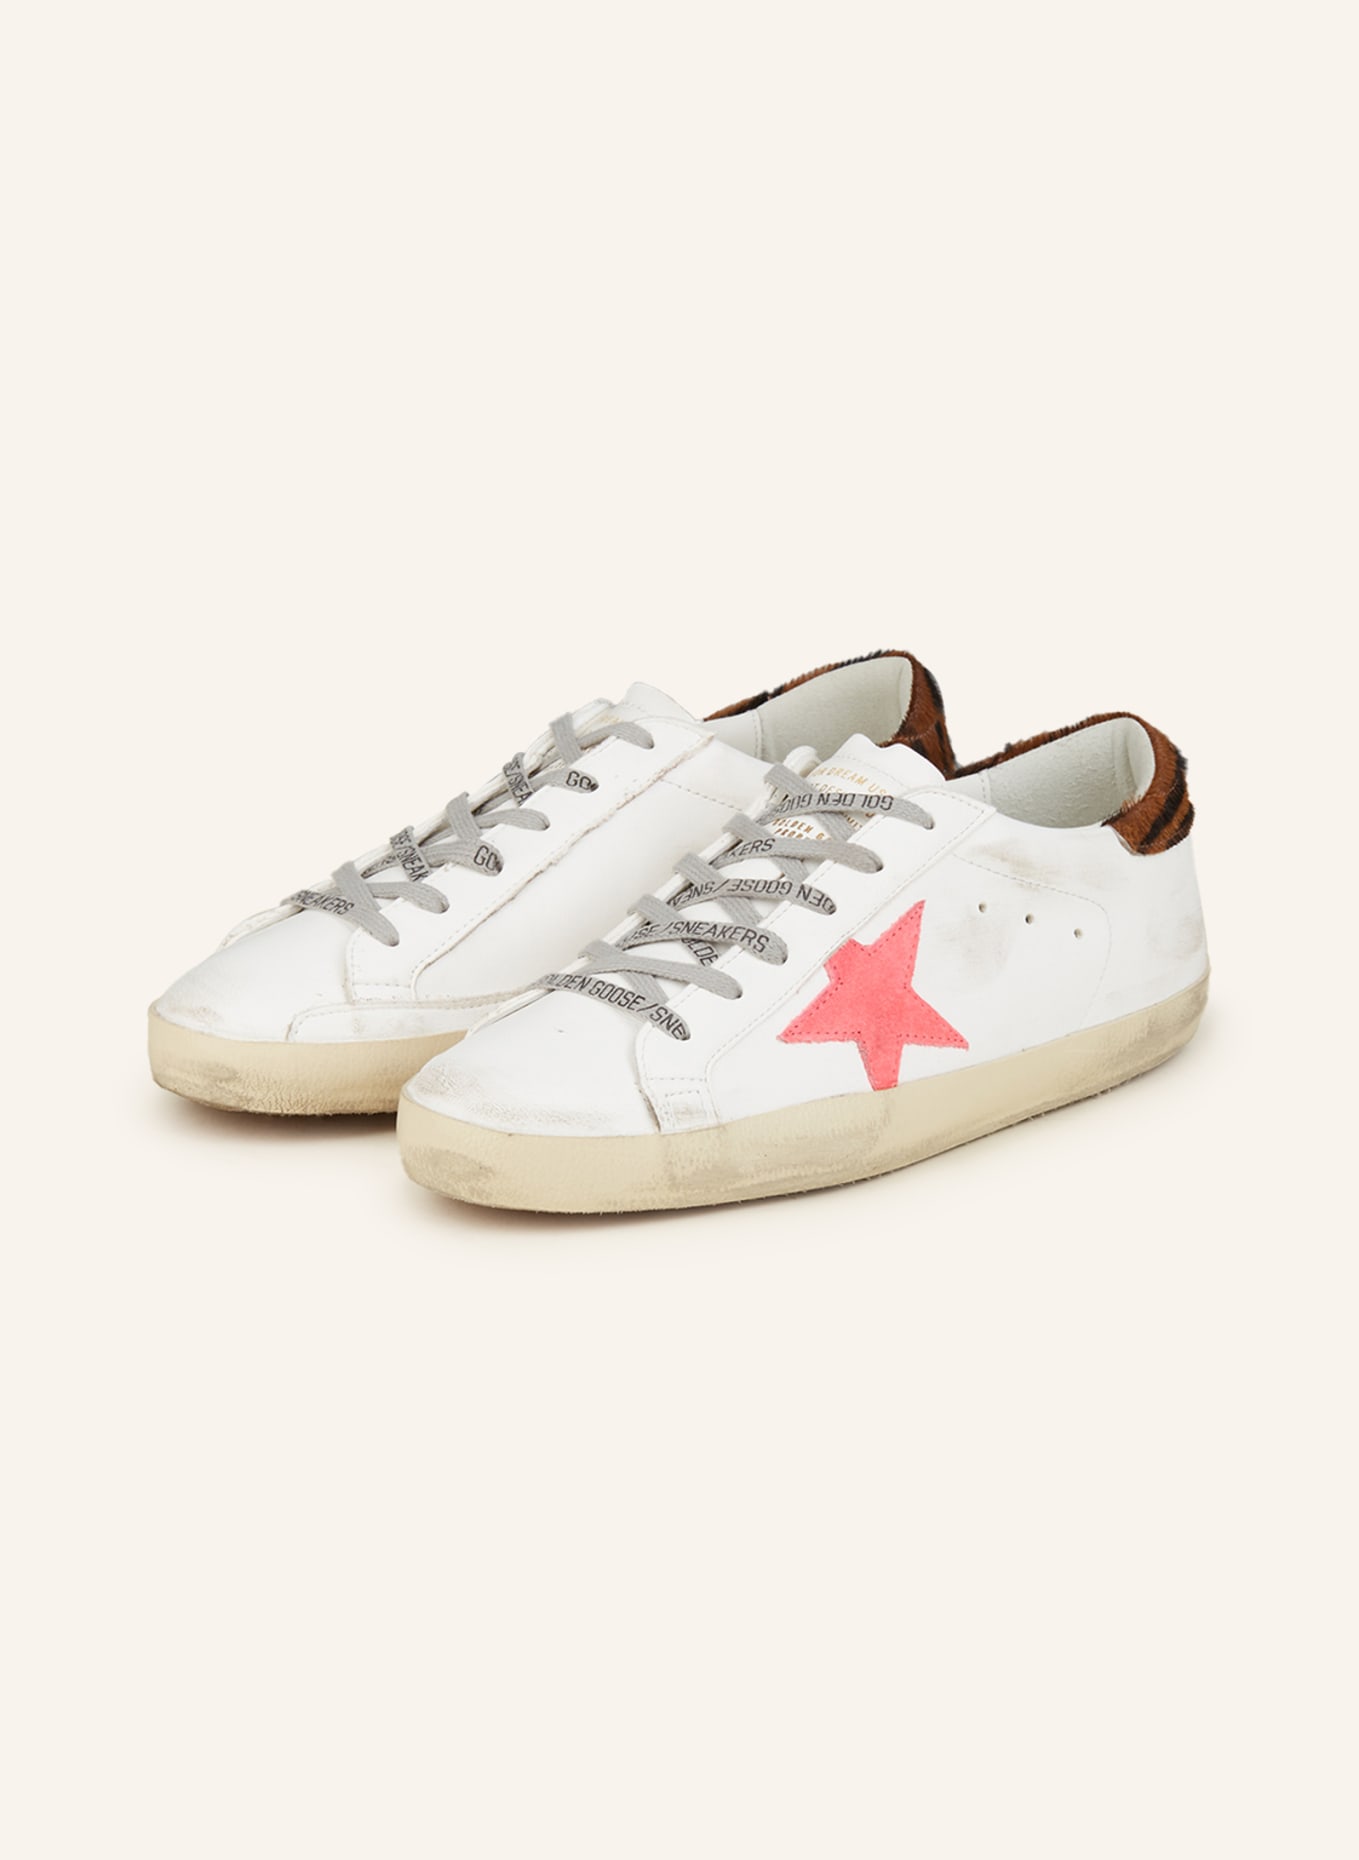 My Honest Review of the Golden Goose Purestar Sneakers - Fashion Jackson